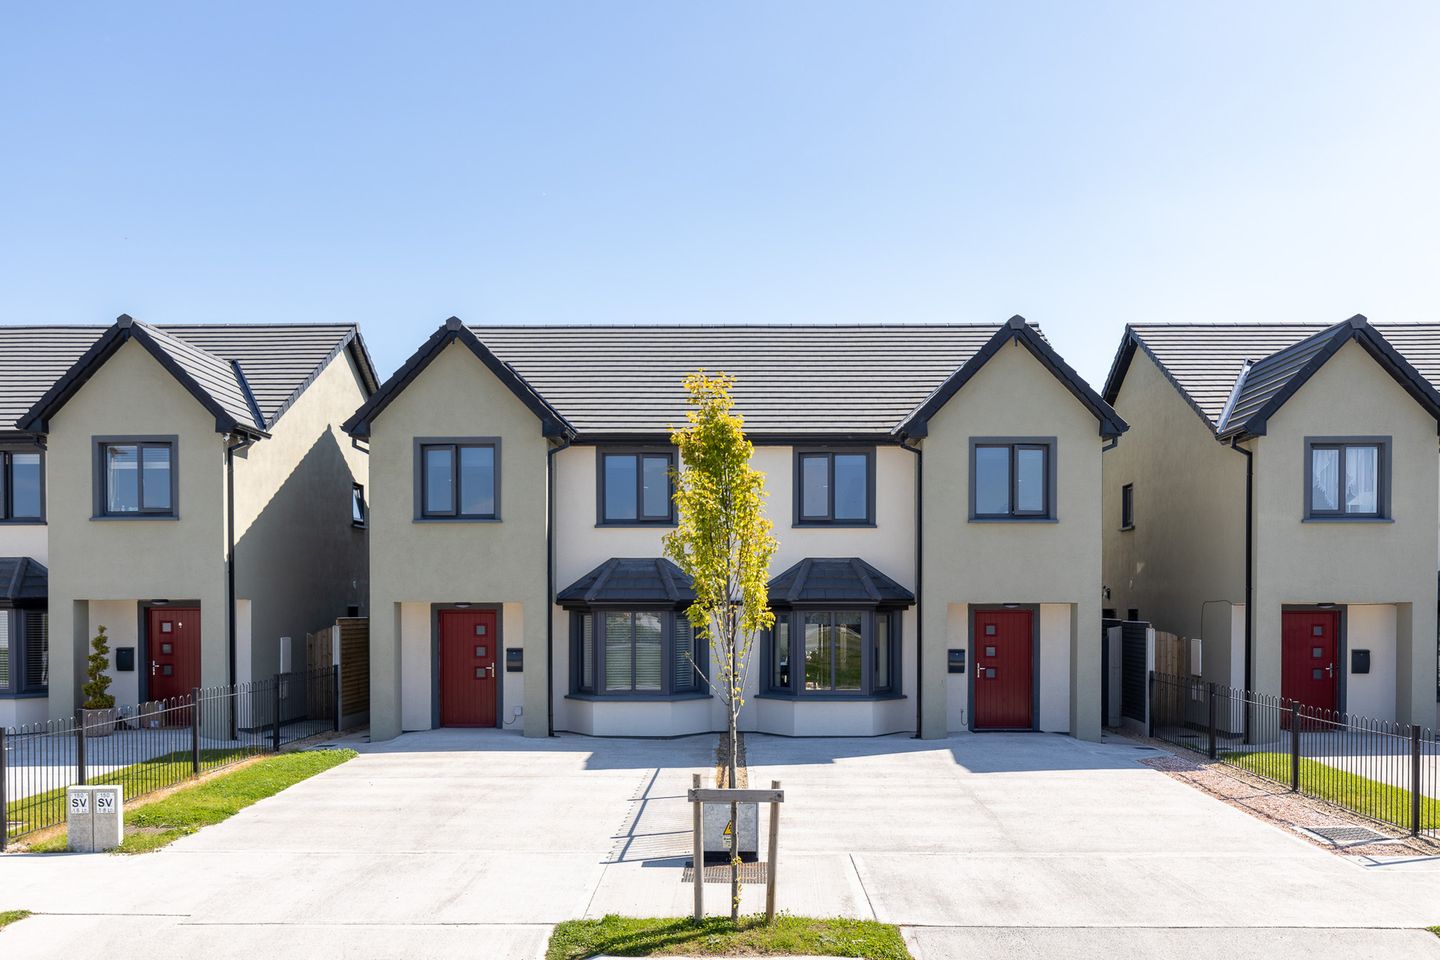 3-Bed Semi-Detached, Cois Dara, 3-Bed Semi-Detached, Cois Dara, Tullow Road, Carlow, Carlow Town, Co. Carlow